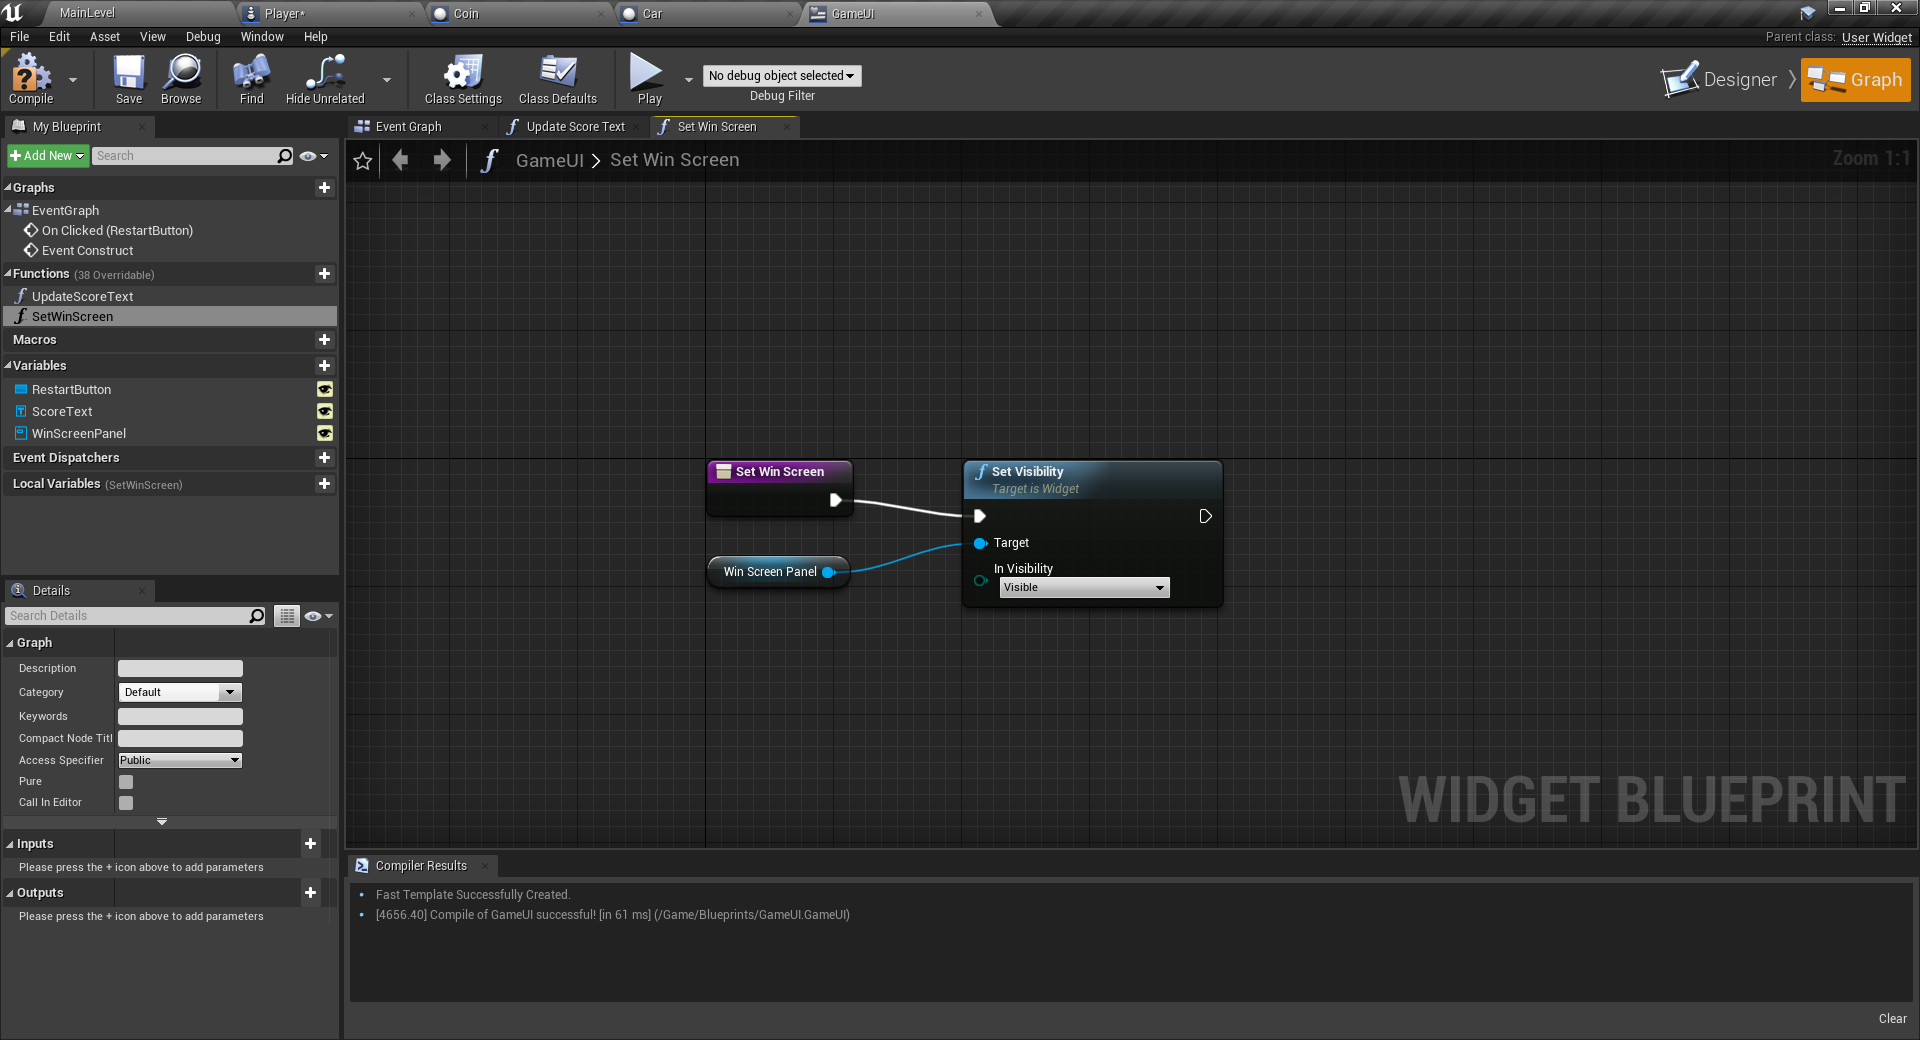 Logic to notify player of winning in Unreal Engine